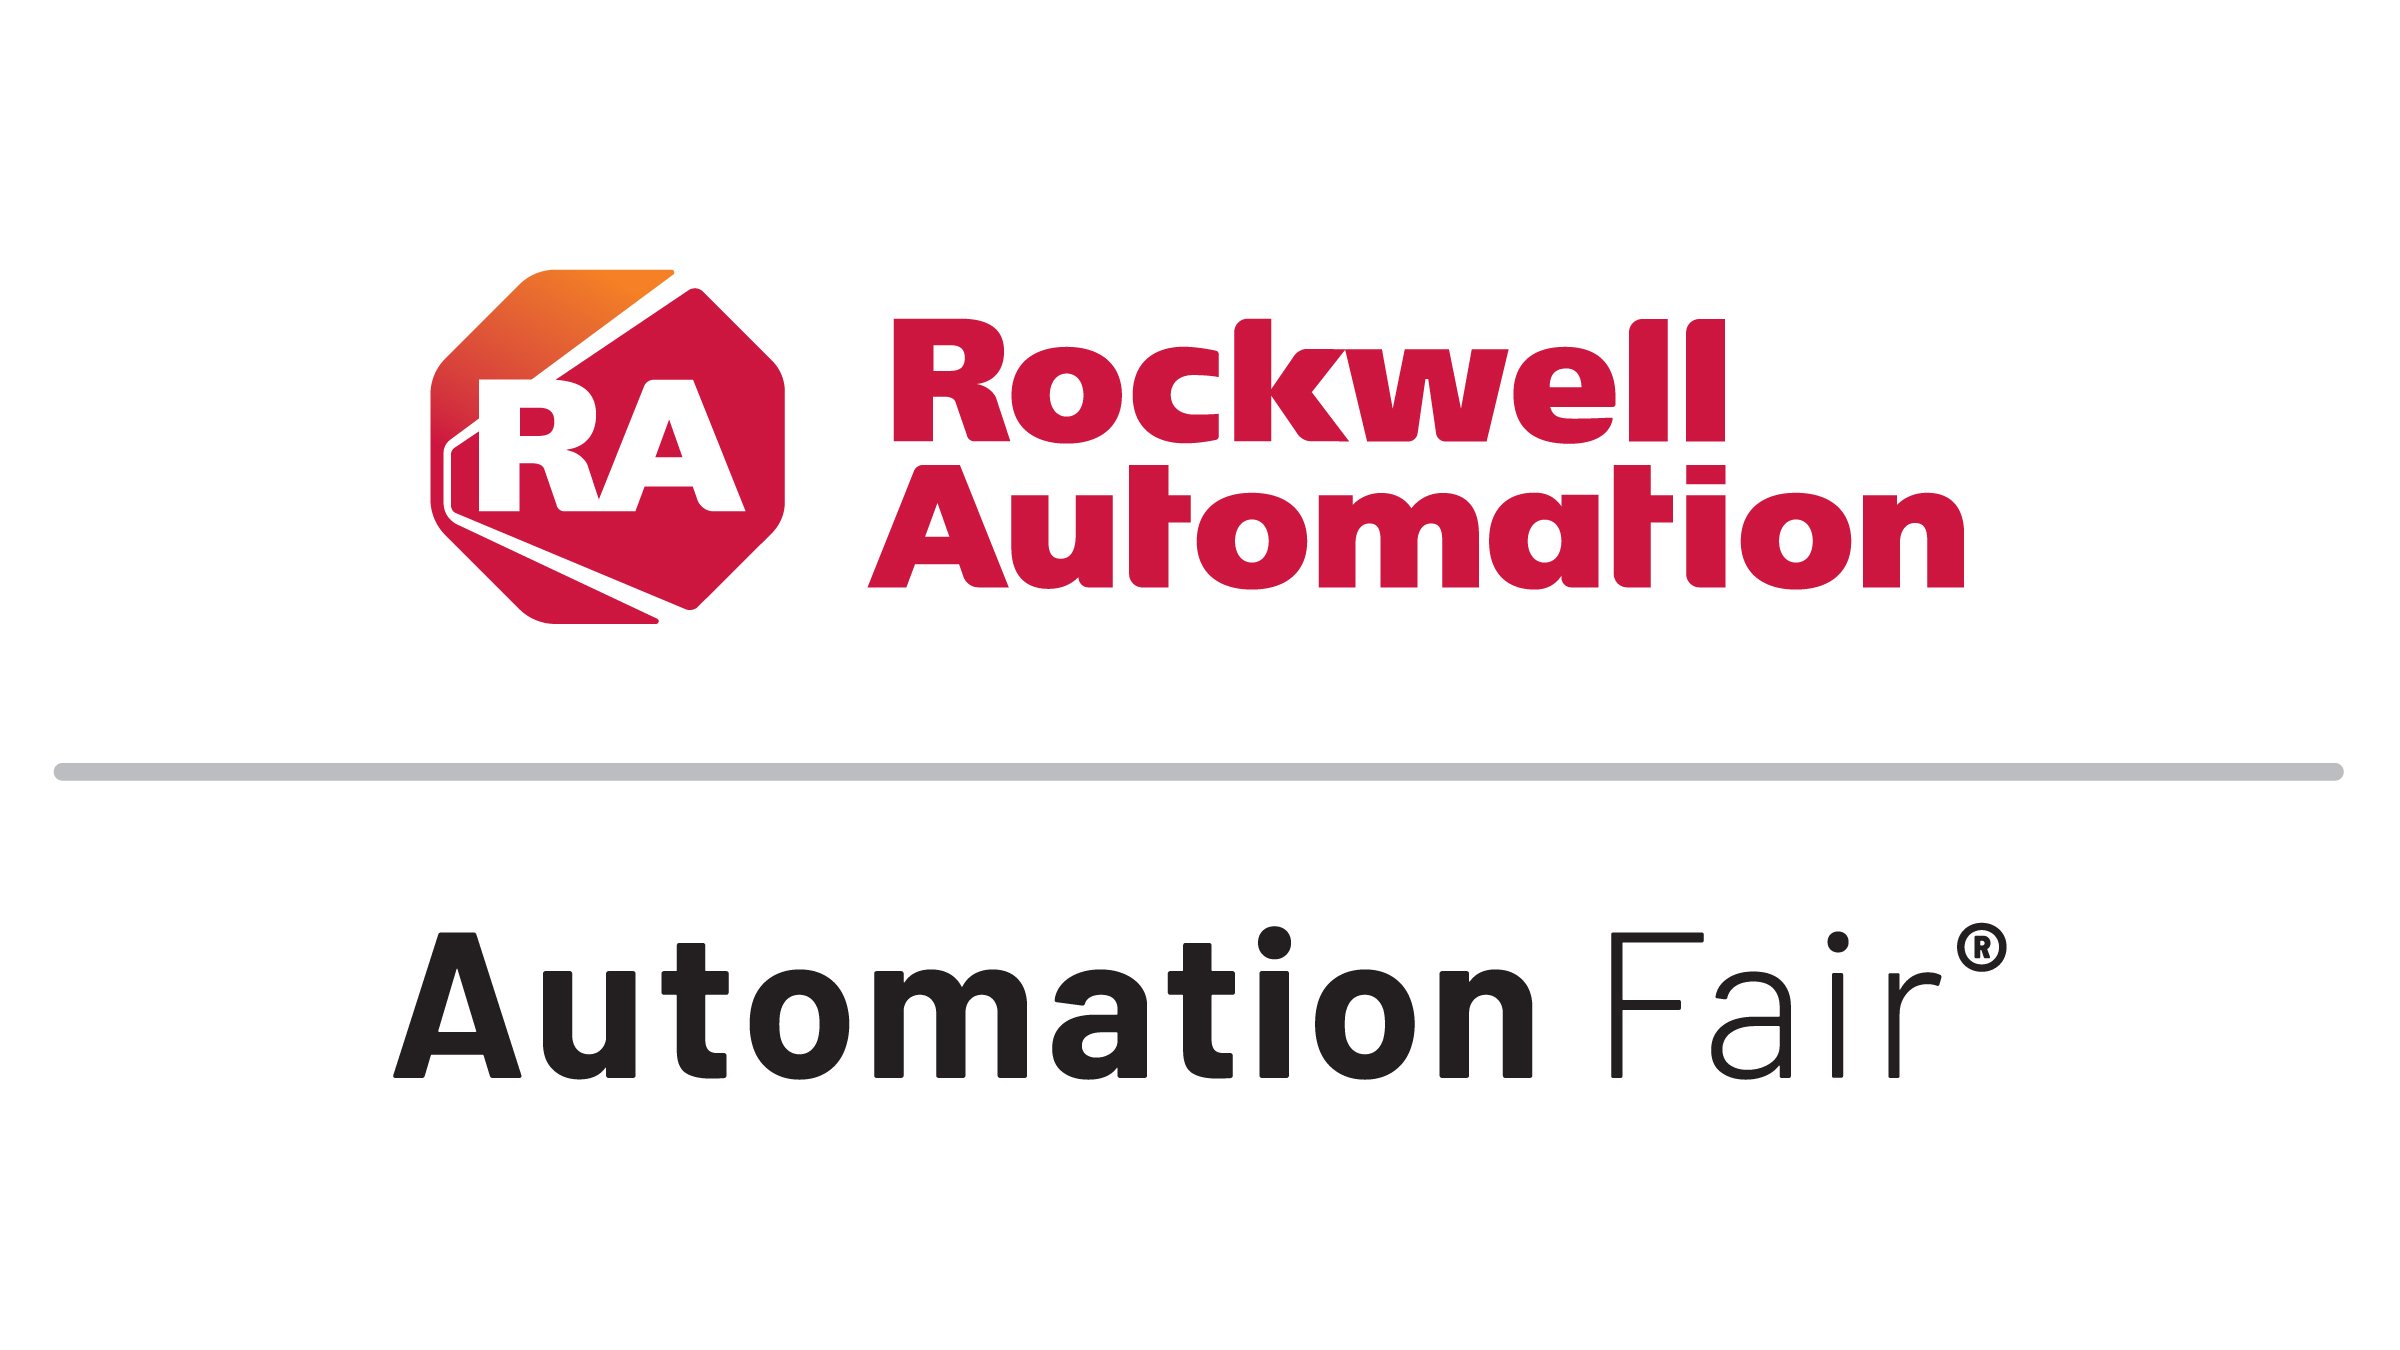 red Rockwell Automation logo with black Automation Fair below